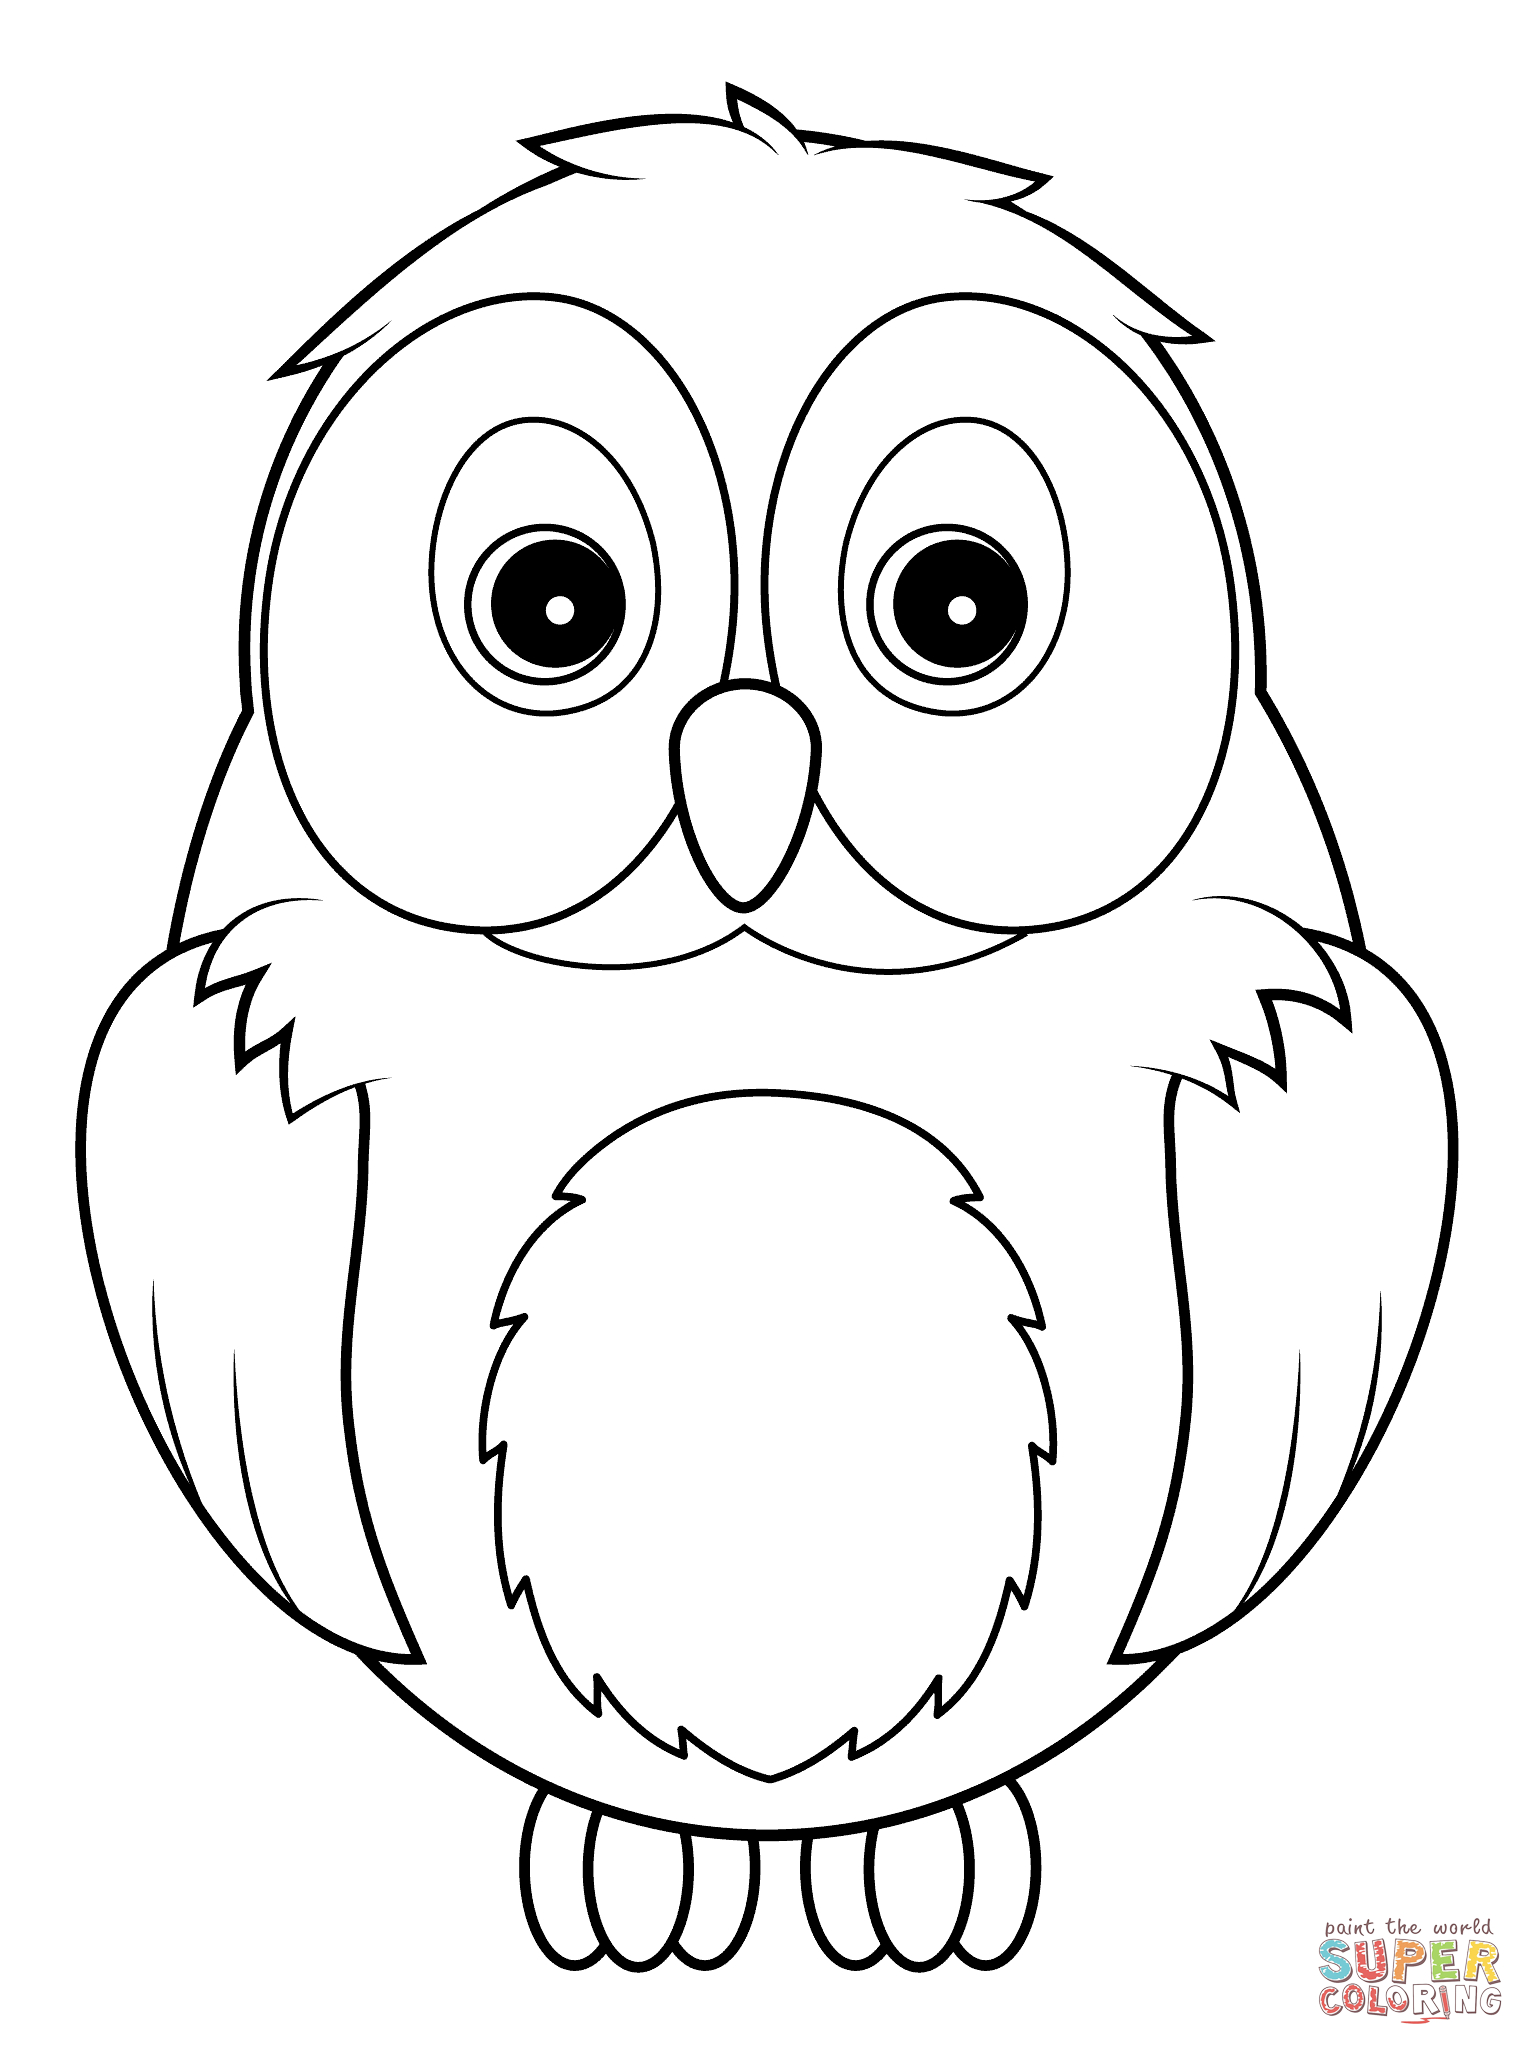 Owls Coloring Pages | Free Coloring Pages - Free Printable Owl Coloring Sheets